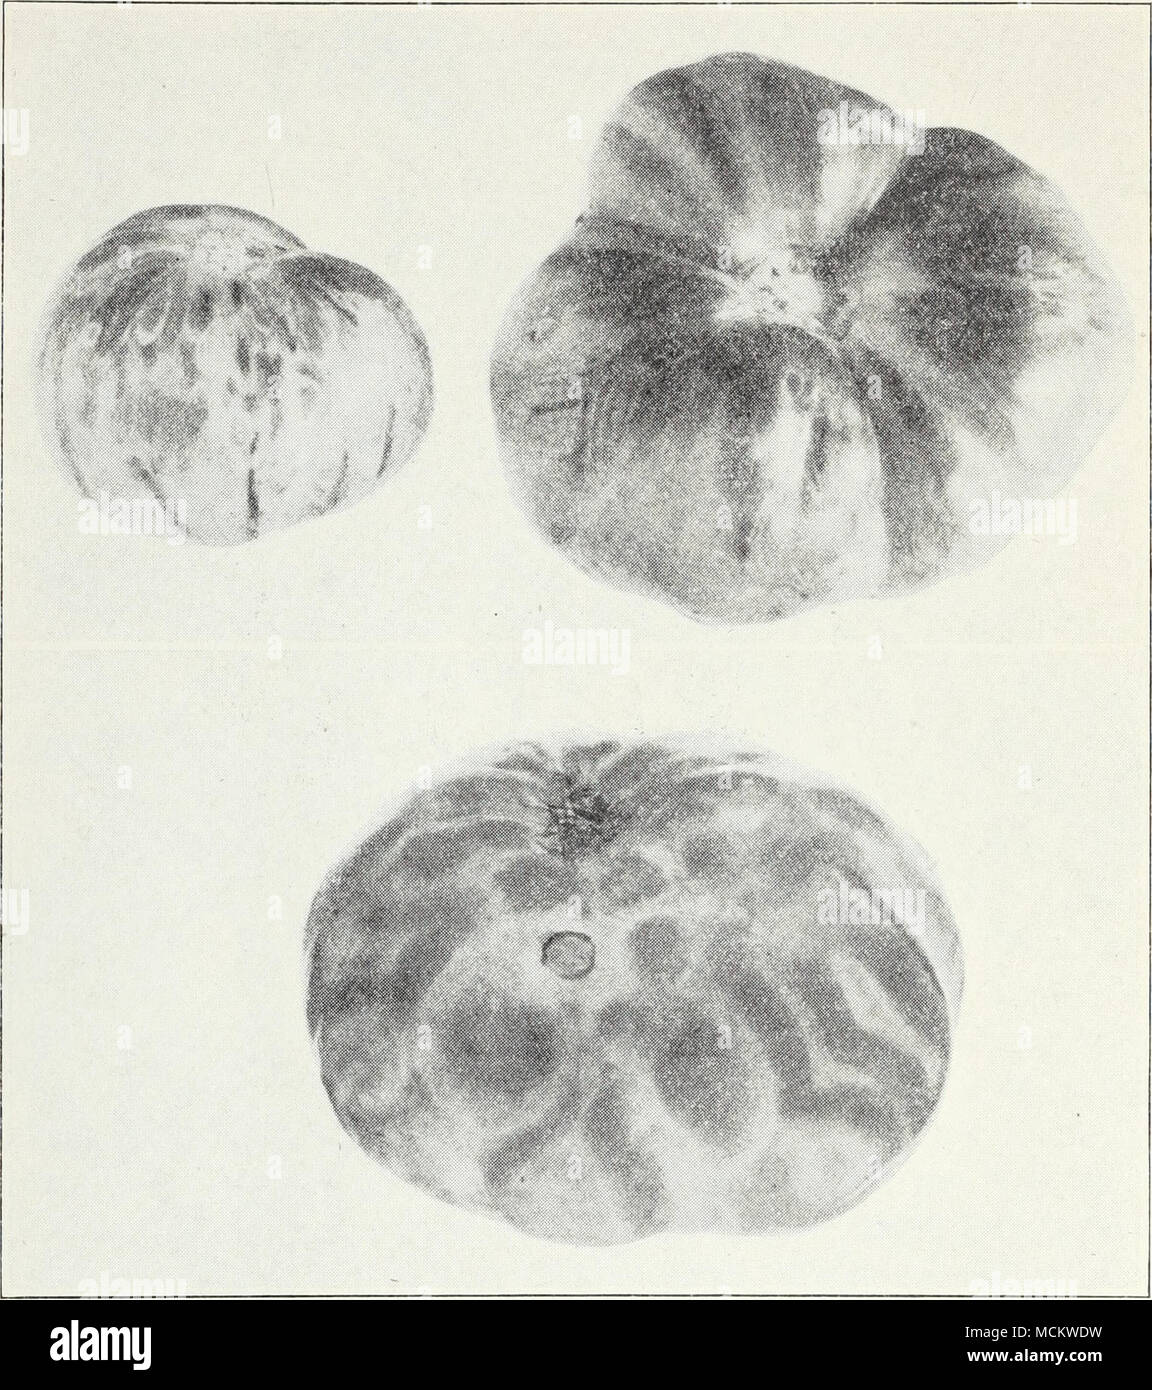 . Fig. 39.—Spotted wilt of tomato. (From Ext. Cir. 104.) toes by stunting and killing of plants and in reduced size, quality, and yield of tomatoes. Market, shipping, and canning varieties are suscepti- ble. Many other hosts are attacked by the same fungus, Verticillium alho-atrum, which causes blackheart of apricots, blue stem of raspber- ries, and important diseases of strawberry, potato, and cotton. The chief hope of combating this disease in tomatoes lies in resistant varieties. The problem is complicated by the fact that another serious Stock Photo